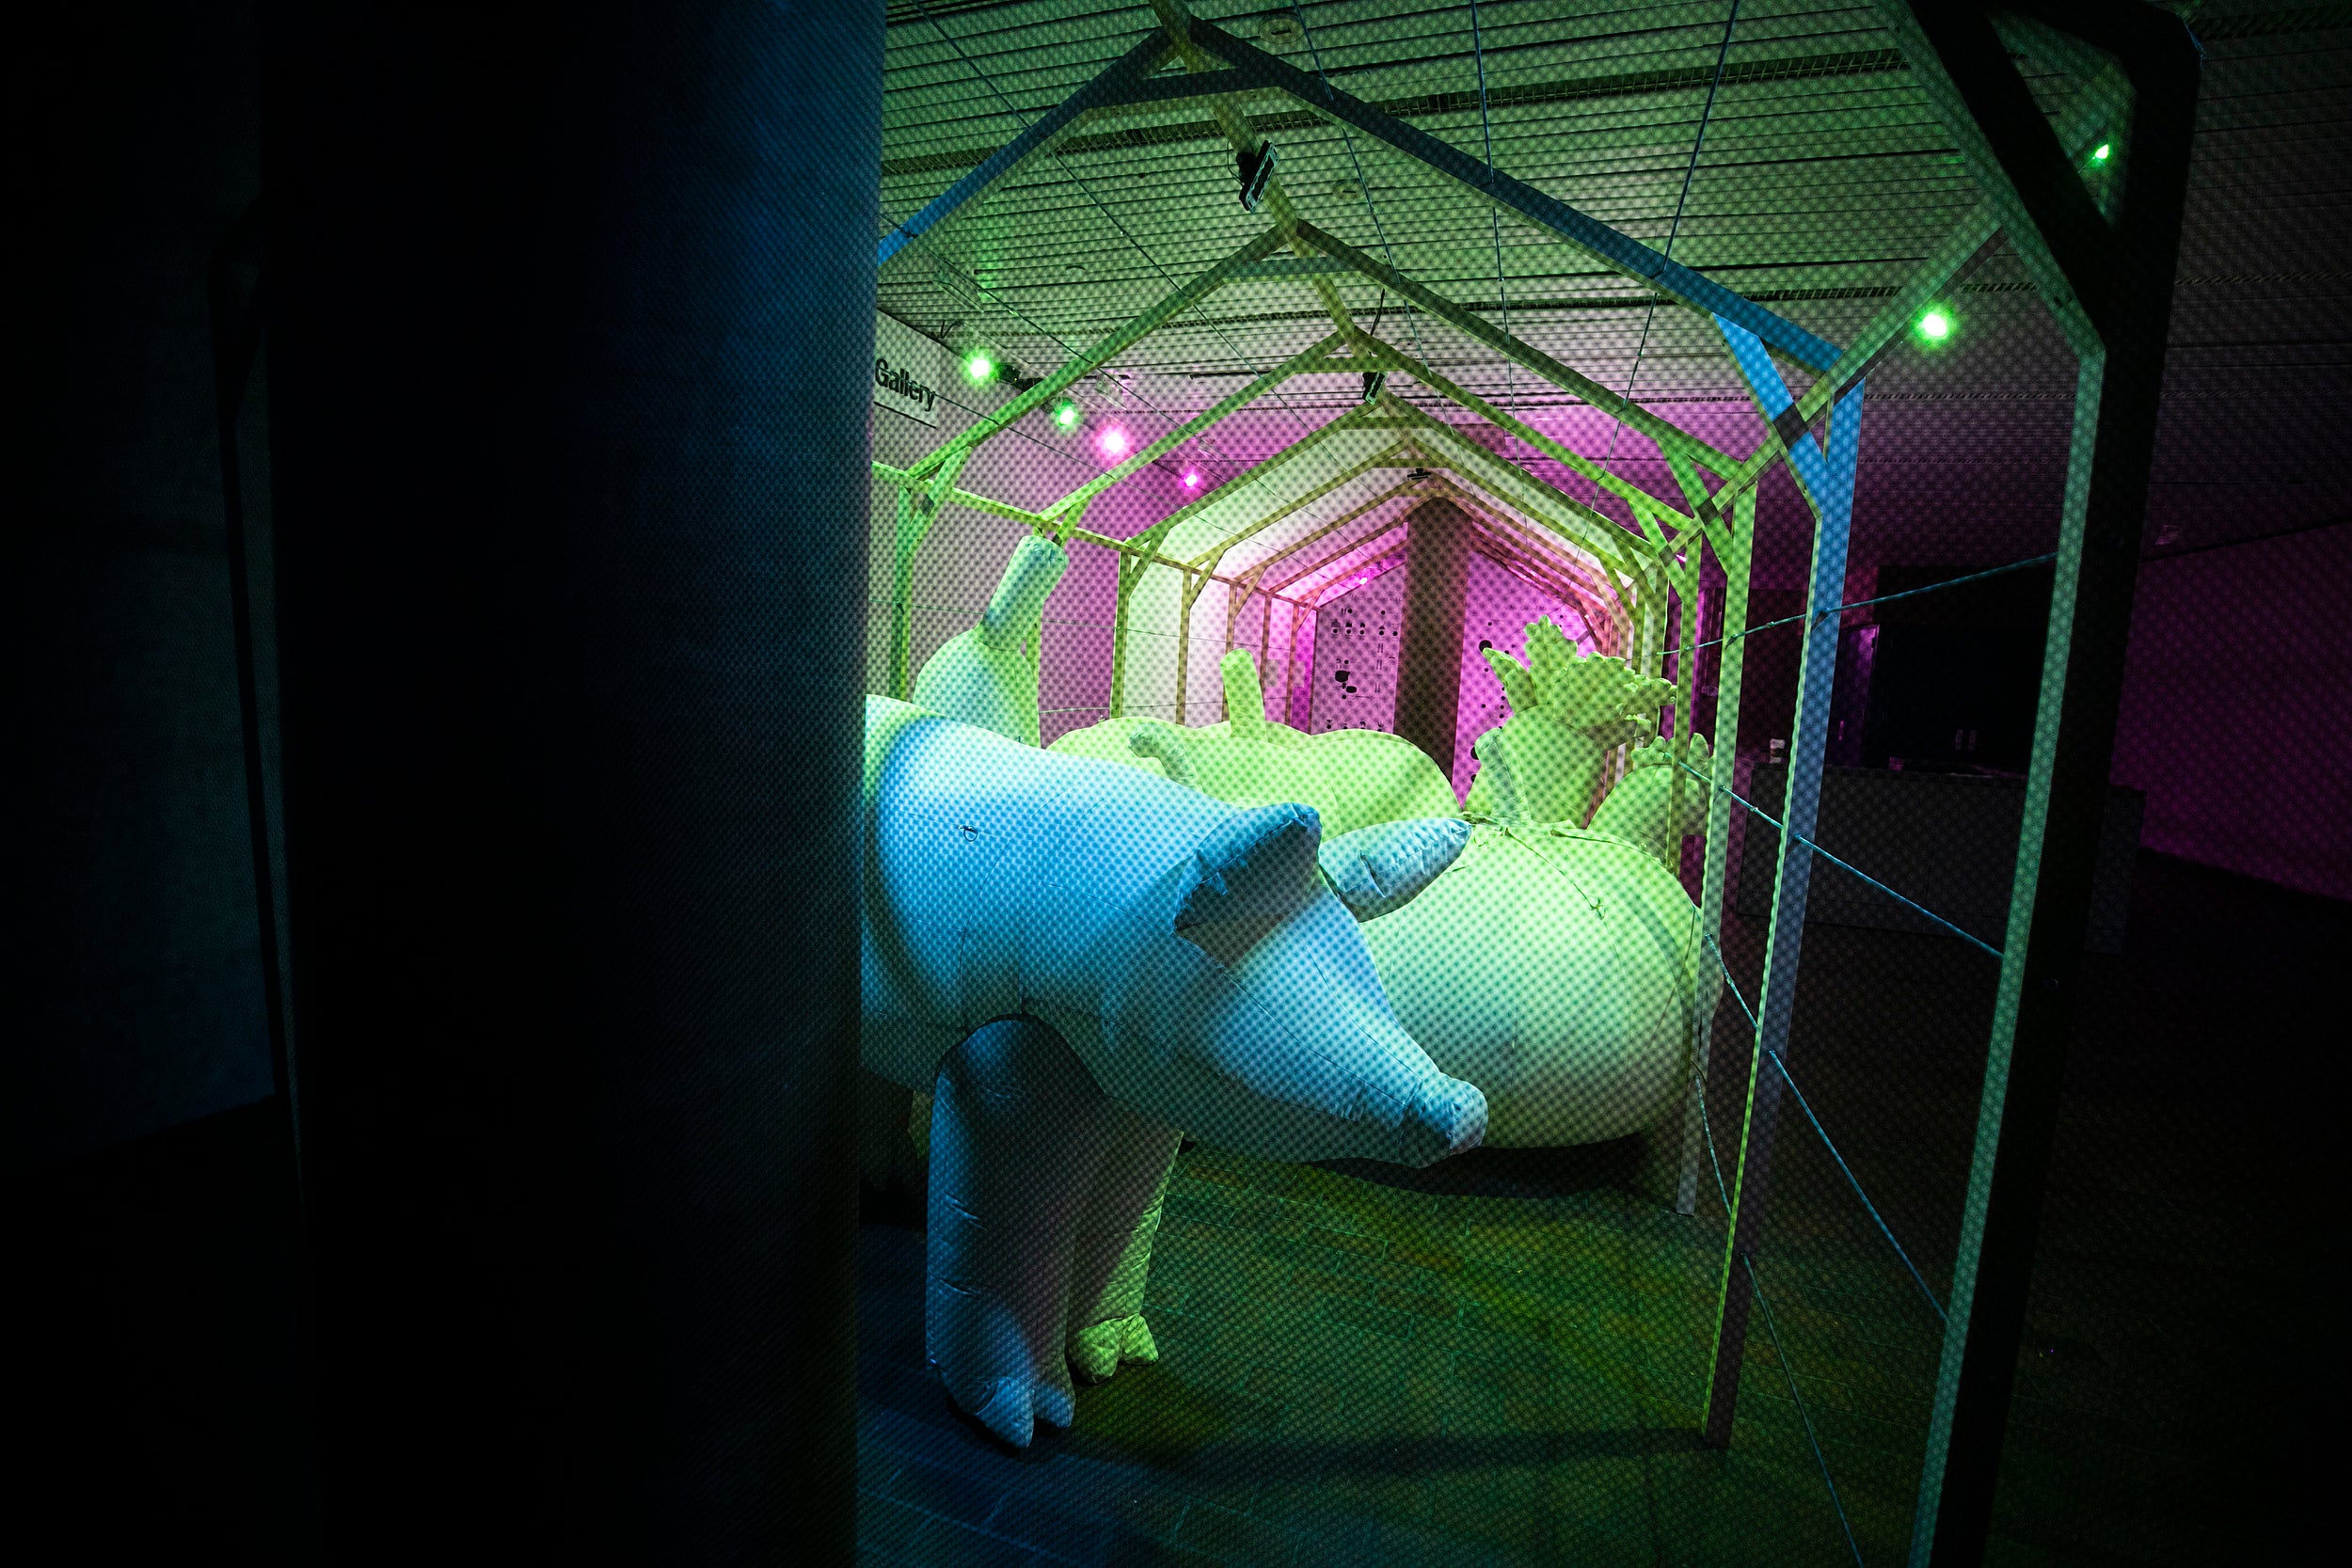 Large pink, green, and blue inflatable farm animals.